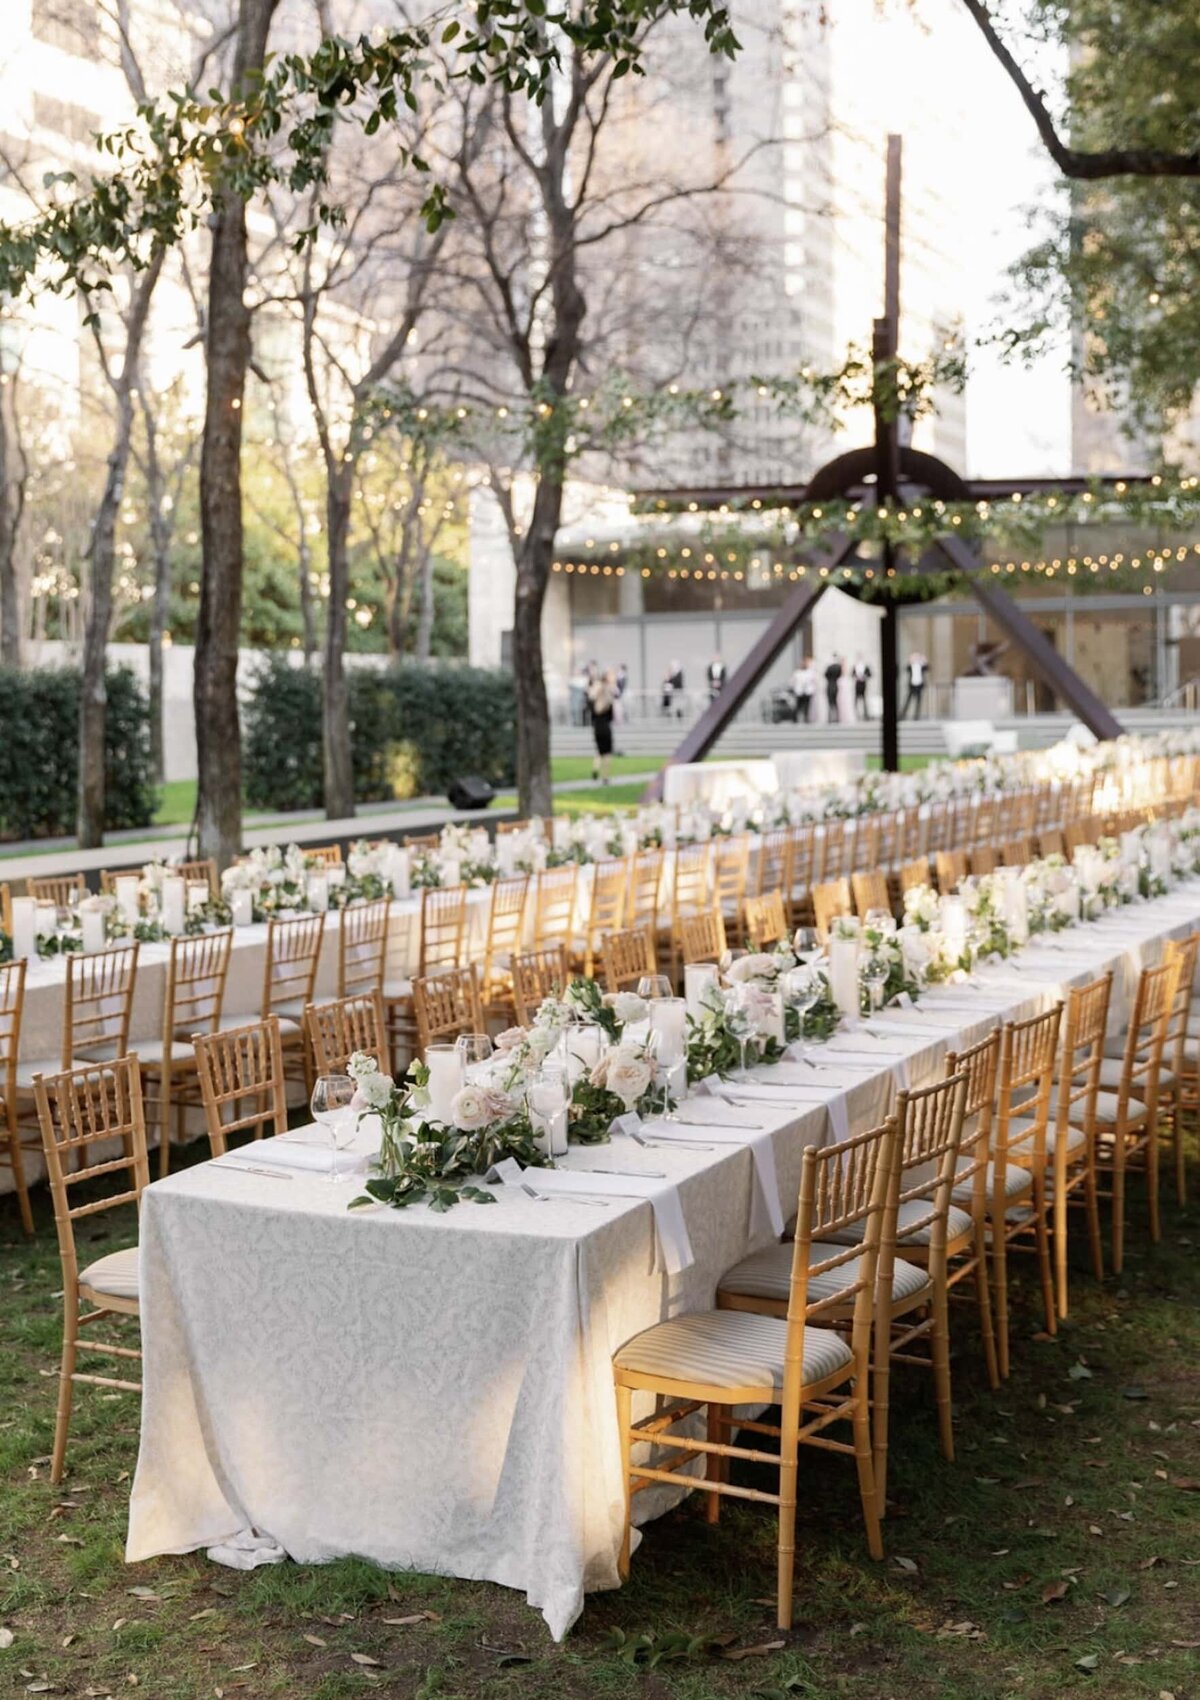 Wedding table with white flowers